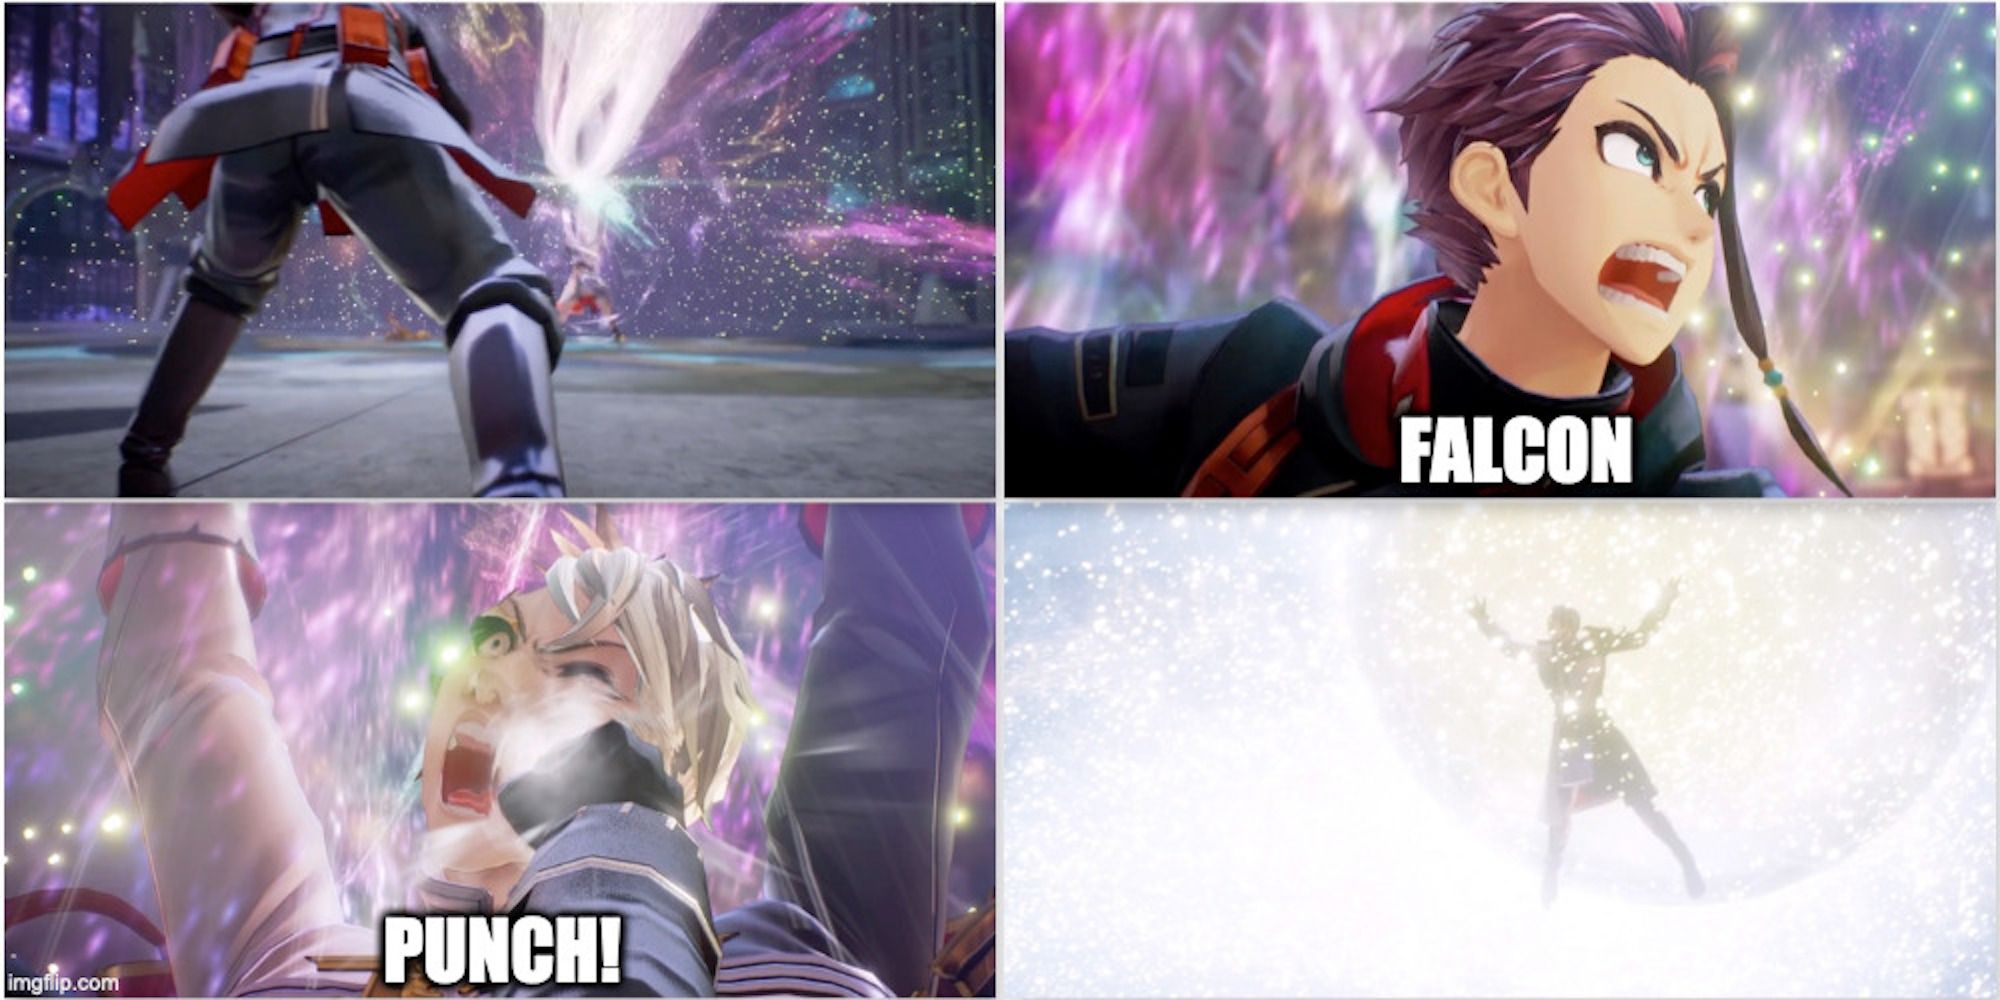 A meme about Smash Bros from Tales of Arise